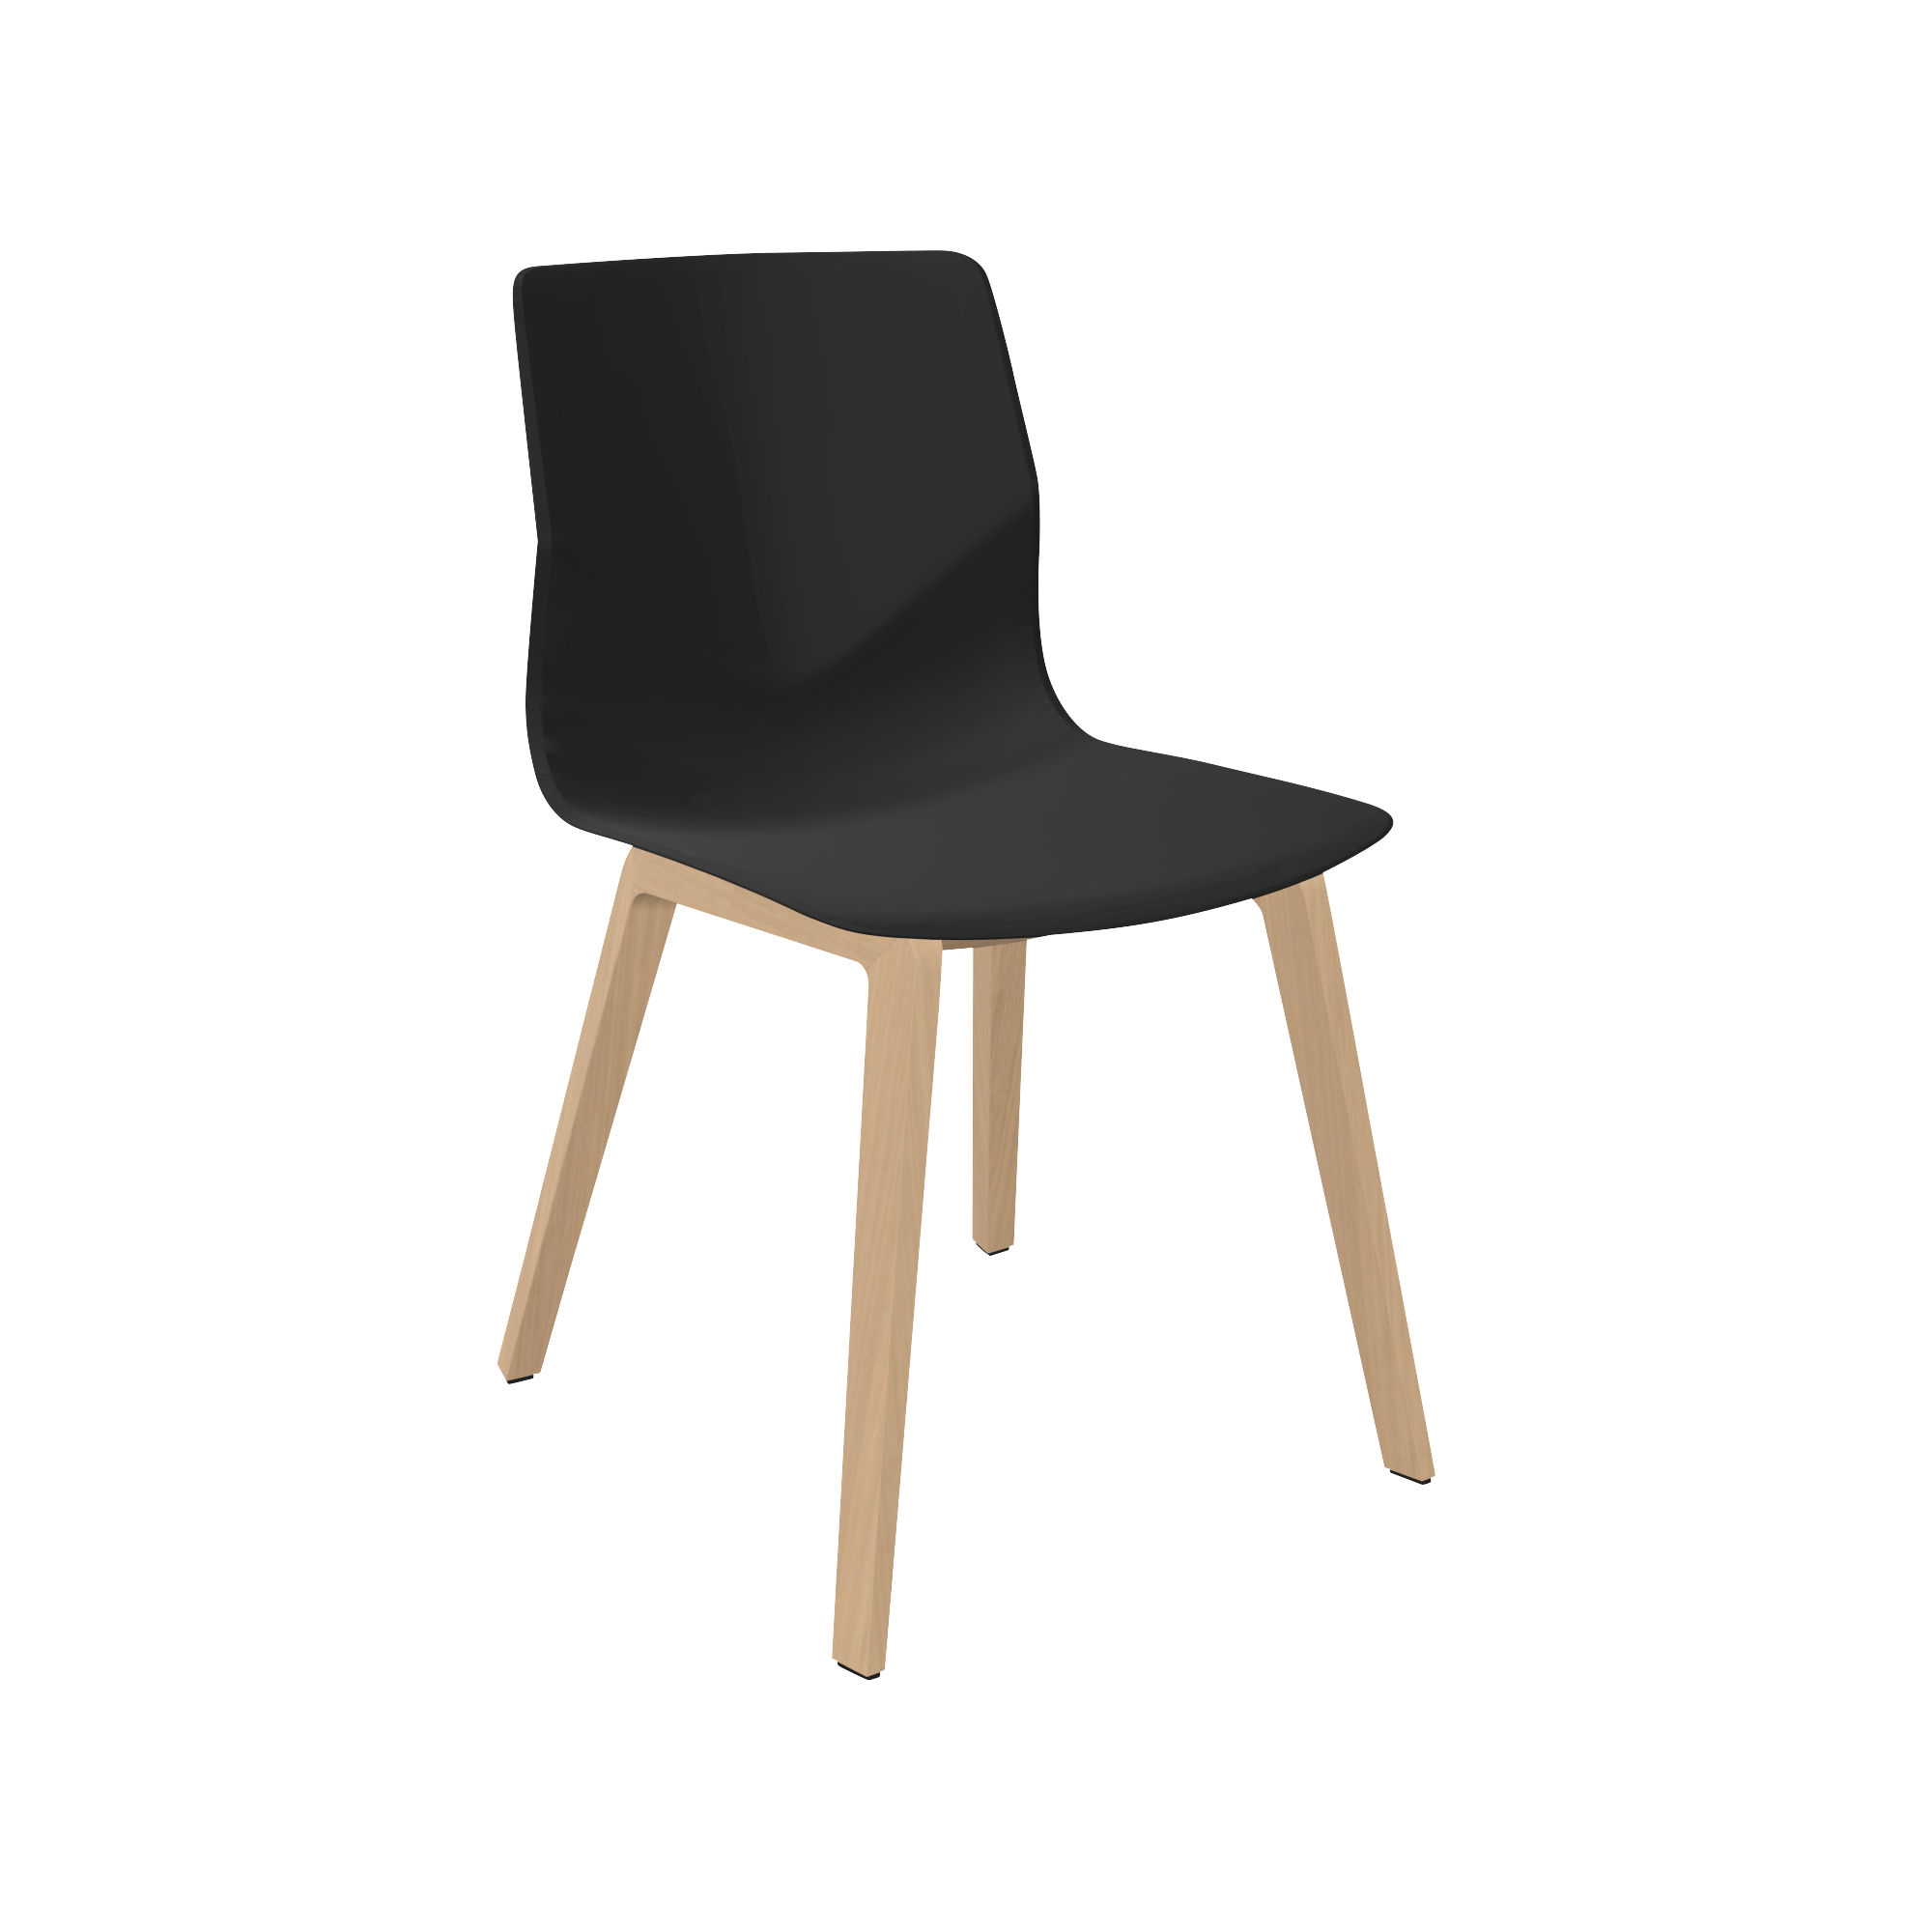 A black dining chair with wooden legs.